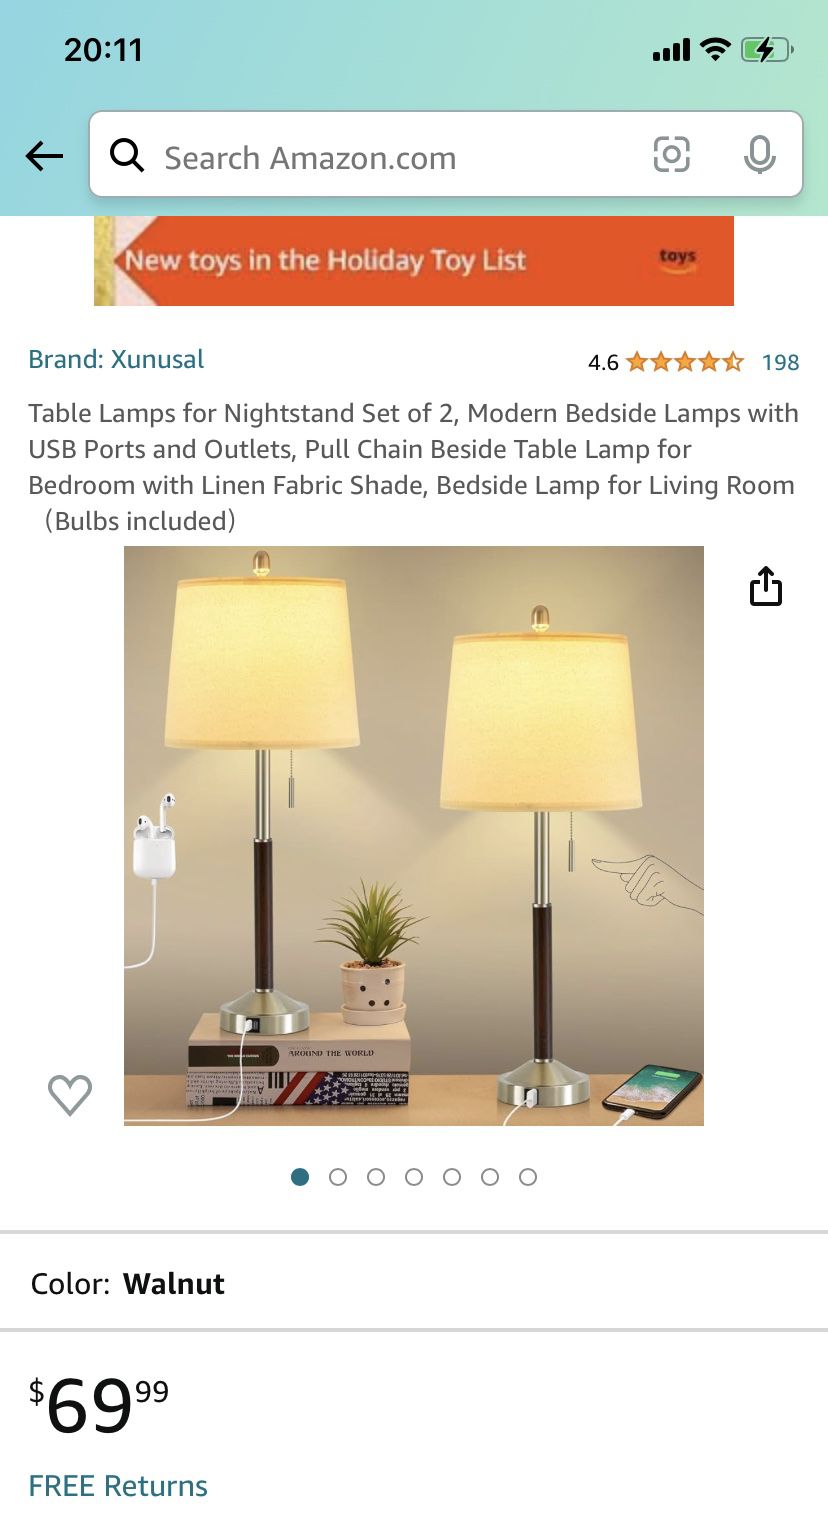 Table Lamps for Nightstand Set of 2, Modern Bedside Lamps with USB Ports and Outlets, Pull Chain Beside Table Lamp for Bedroom with Linen Fabric Shade